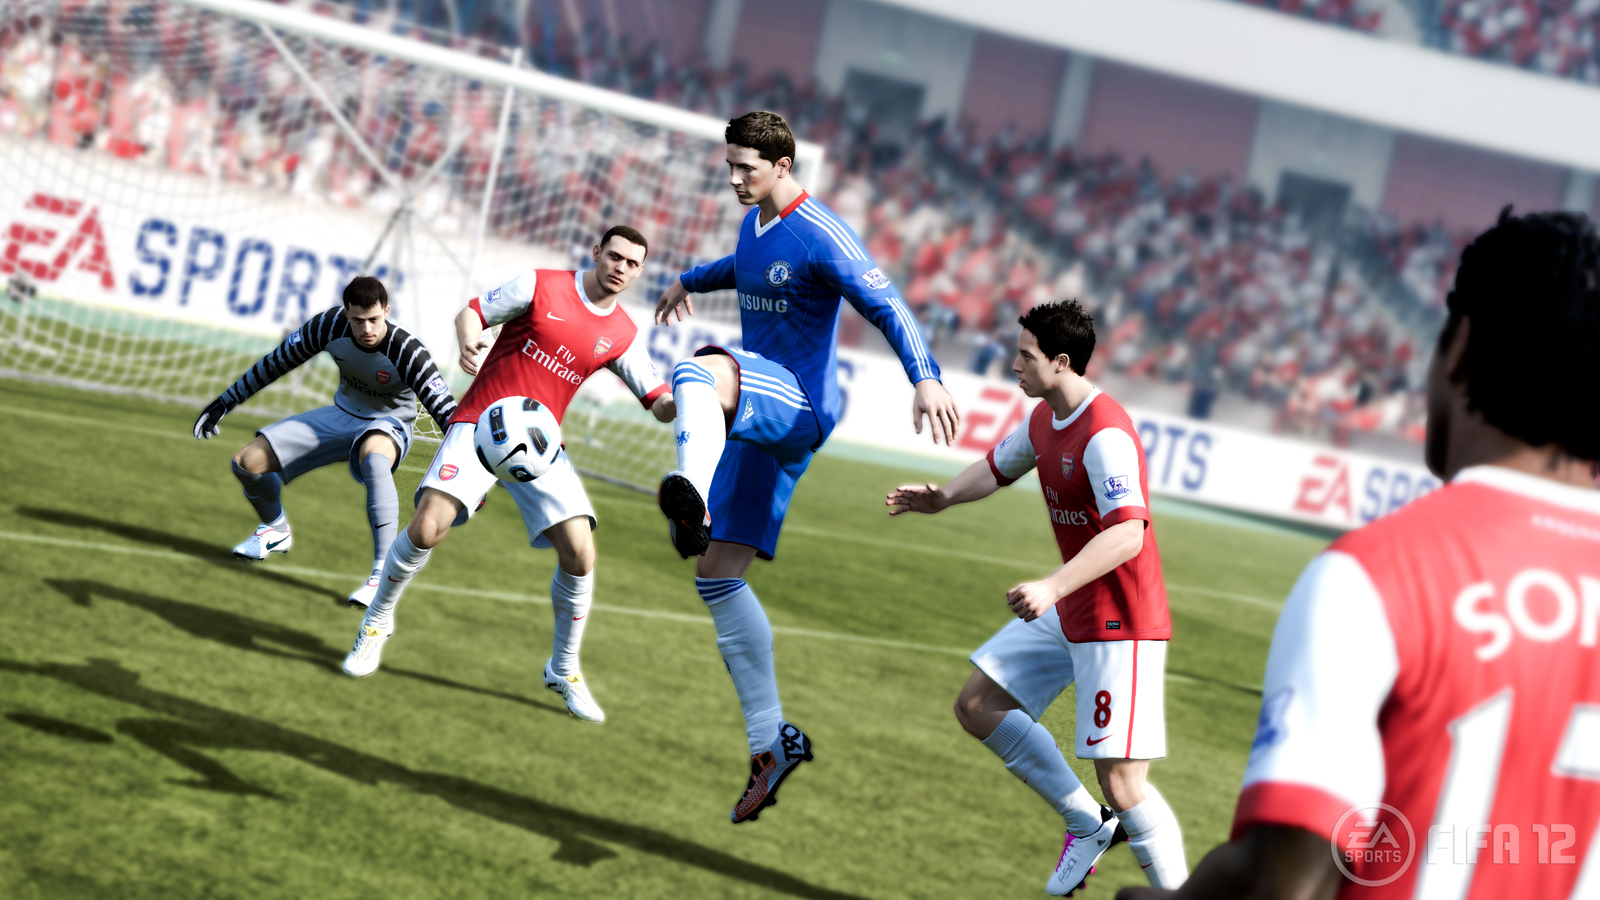 http://s5.picofile.com/file/8156362076/FIFA12_torres_withball_inthebox_WM.jpg